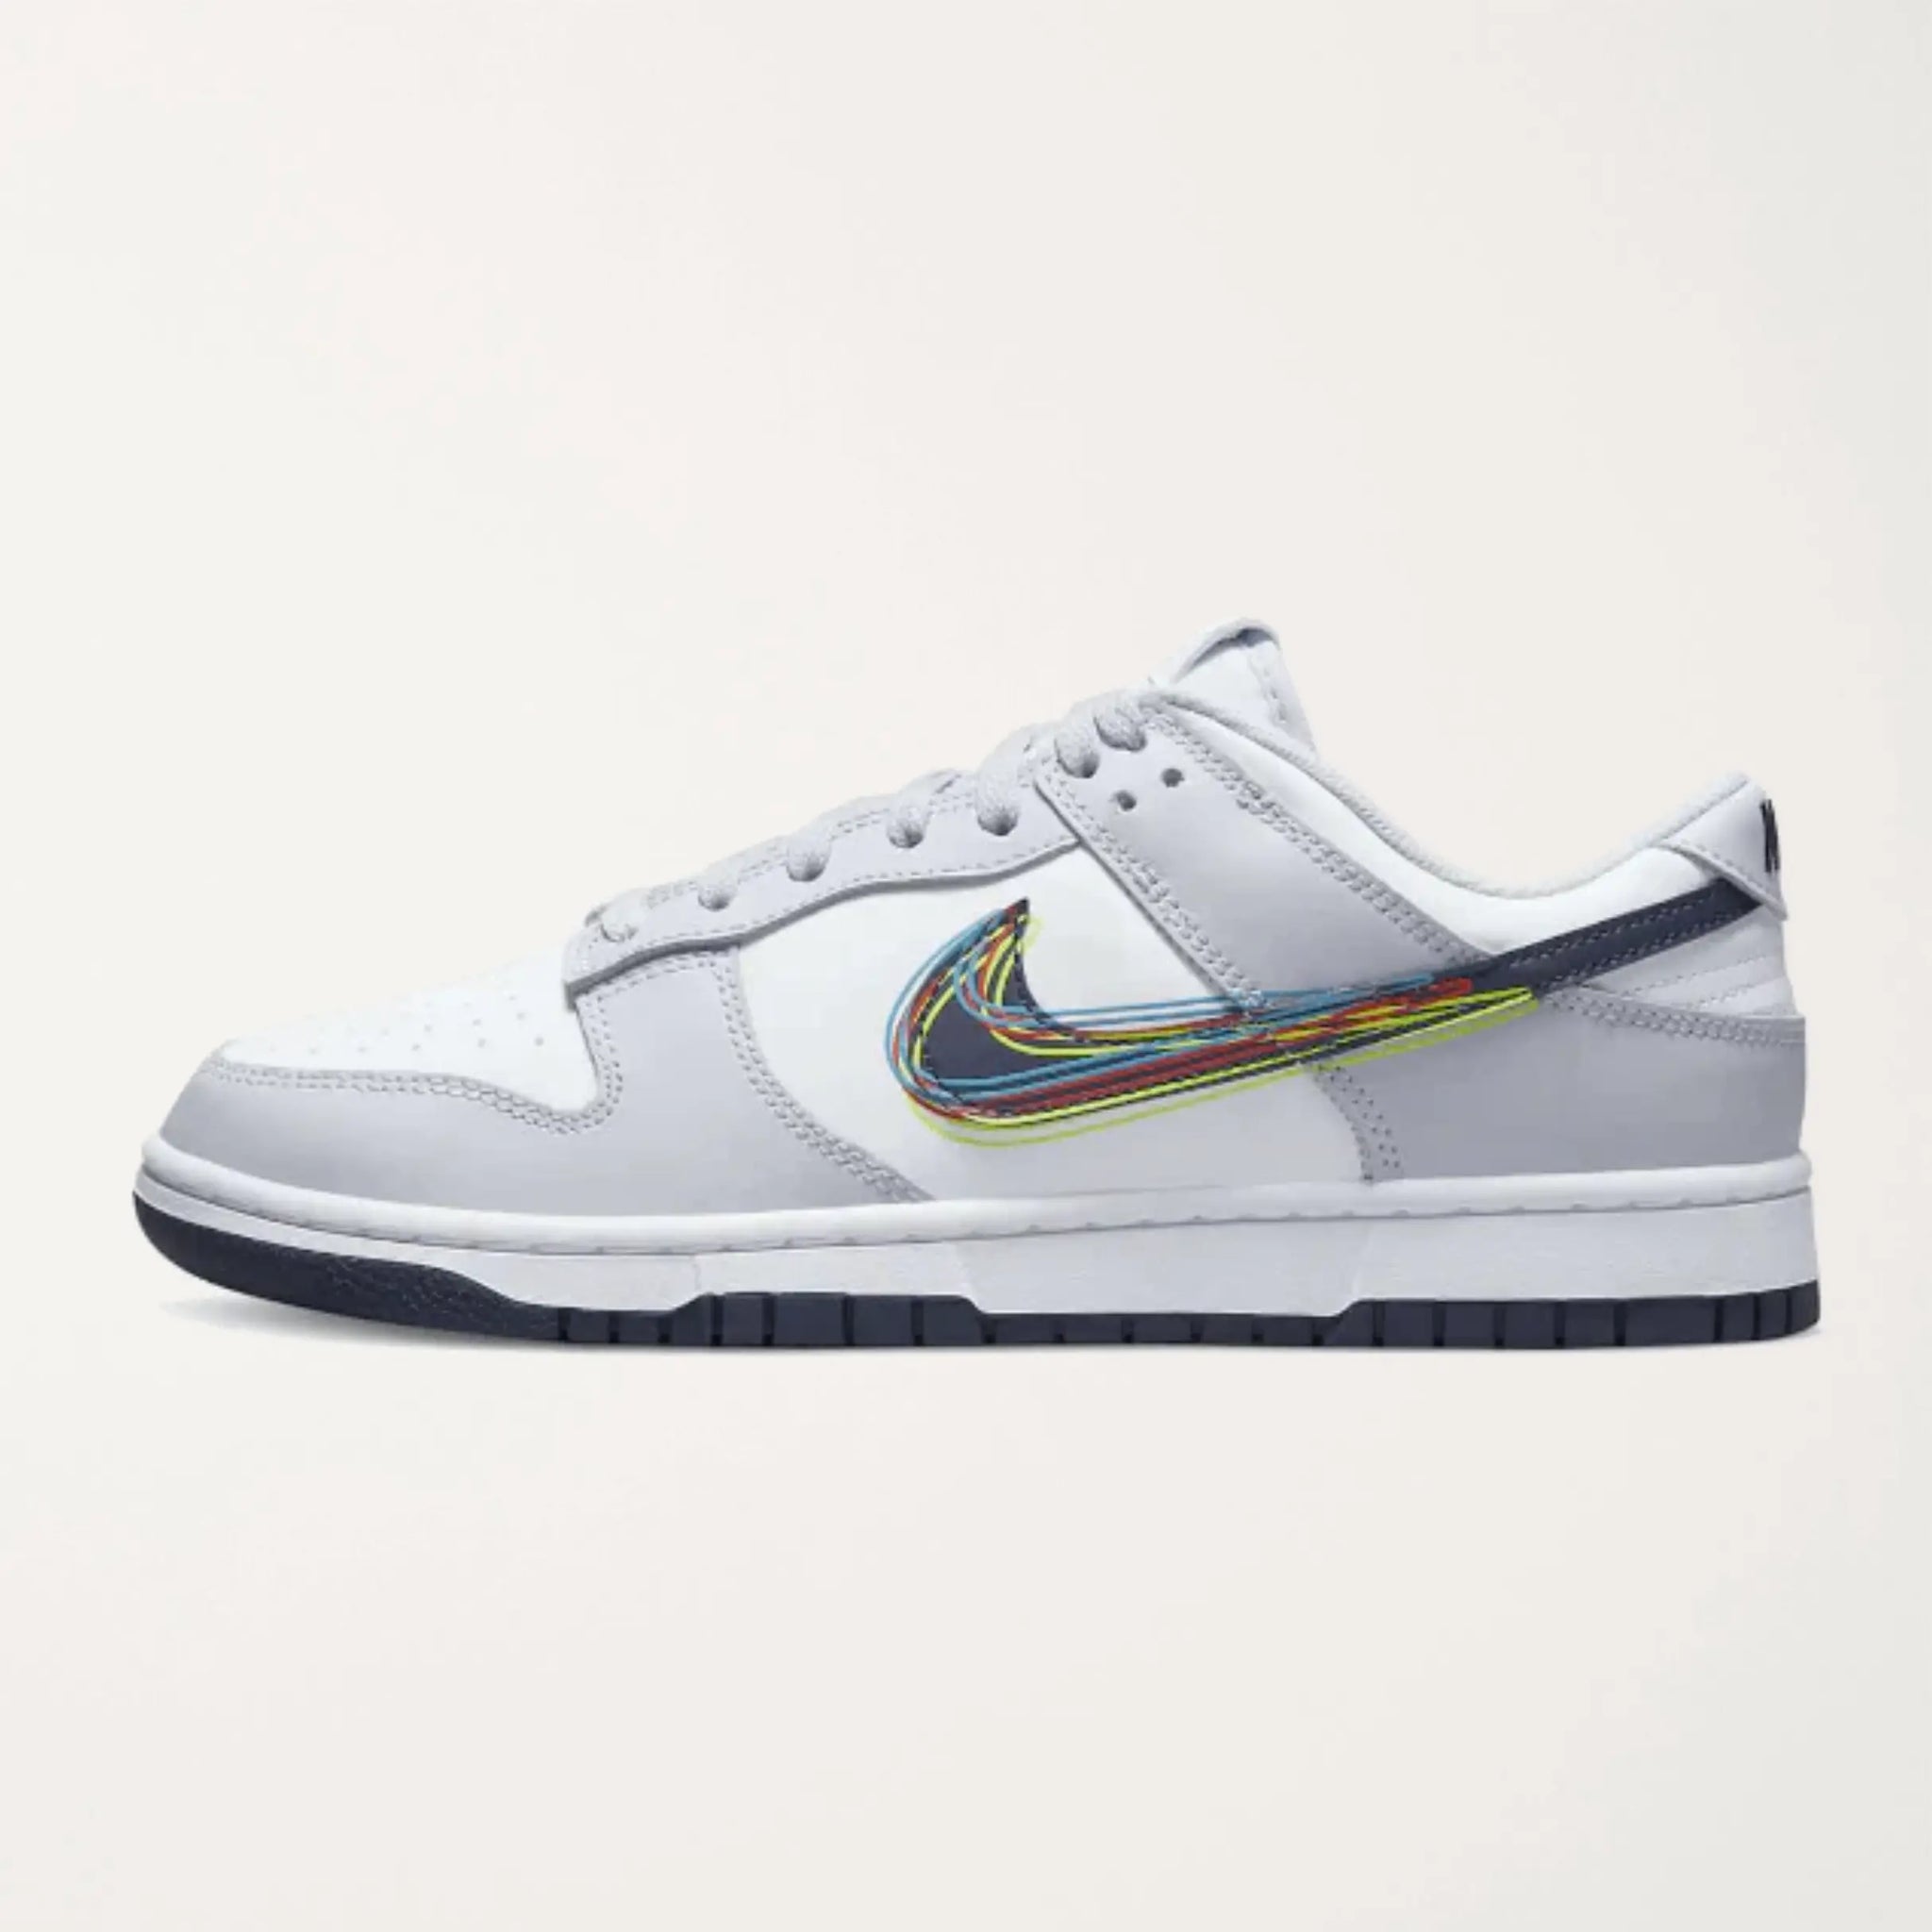 DUNK LOW 3D SWOOSH Chemtov Chemtov-shop It was all a dream